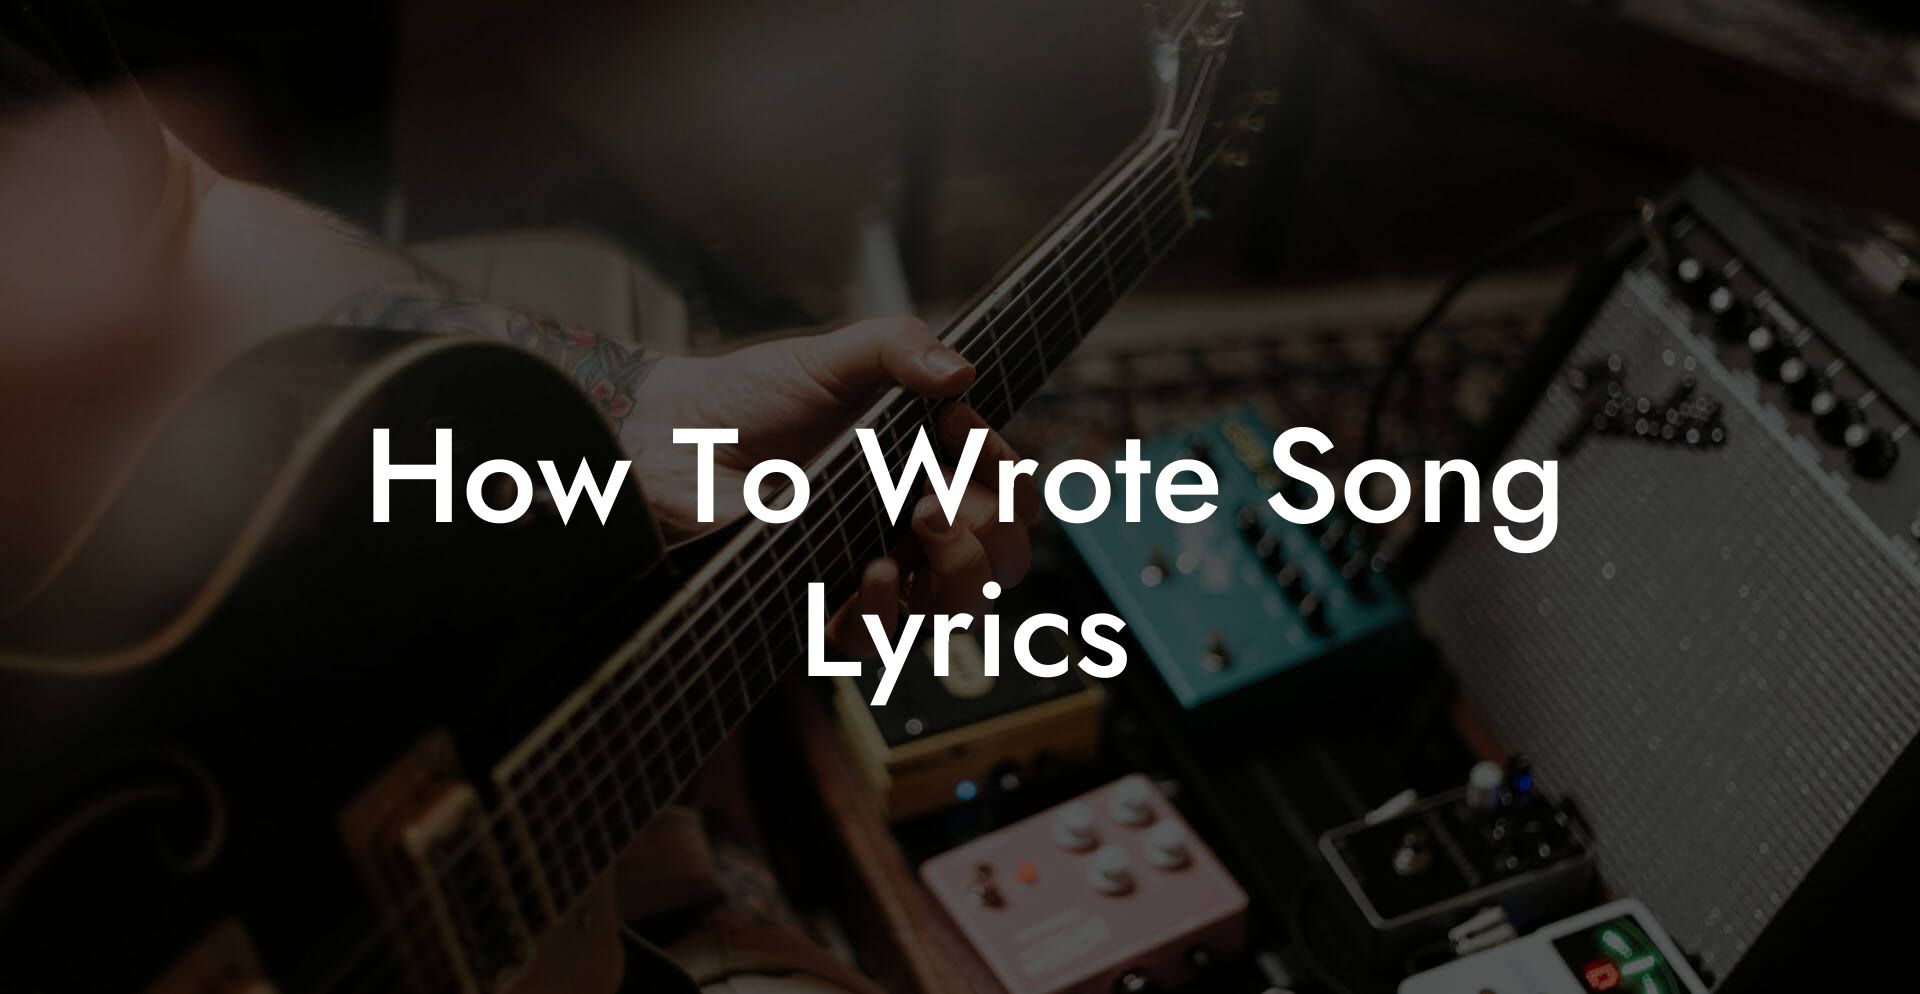 how to wrote song lyrics lyric assistant